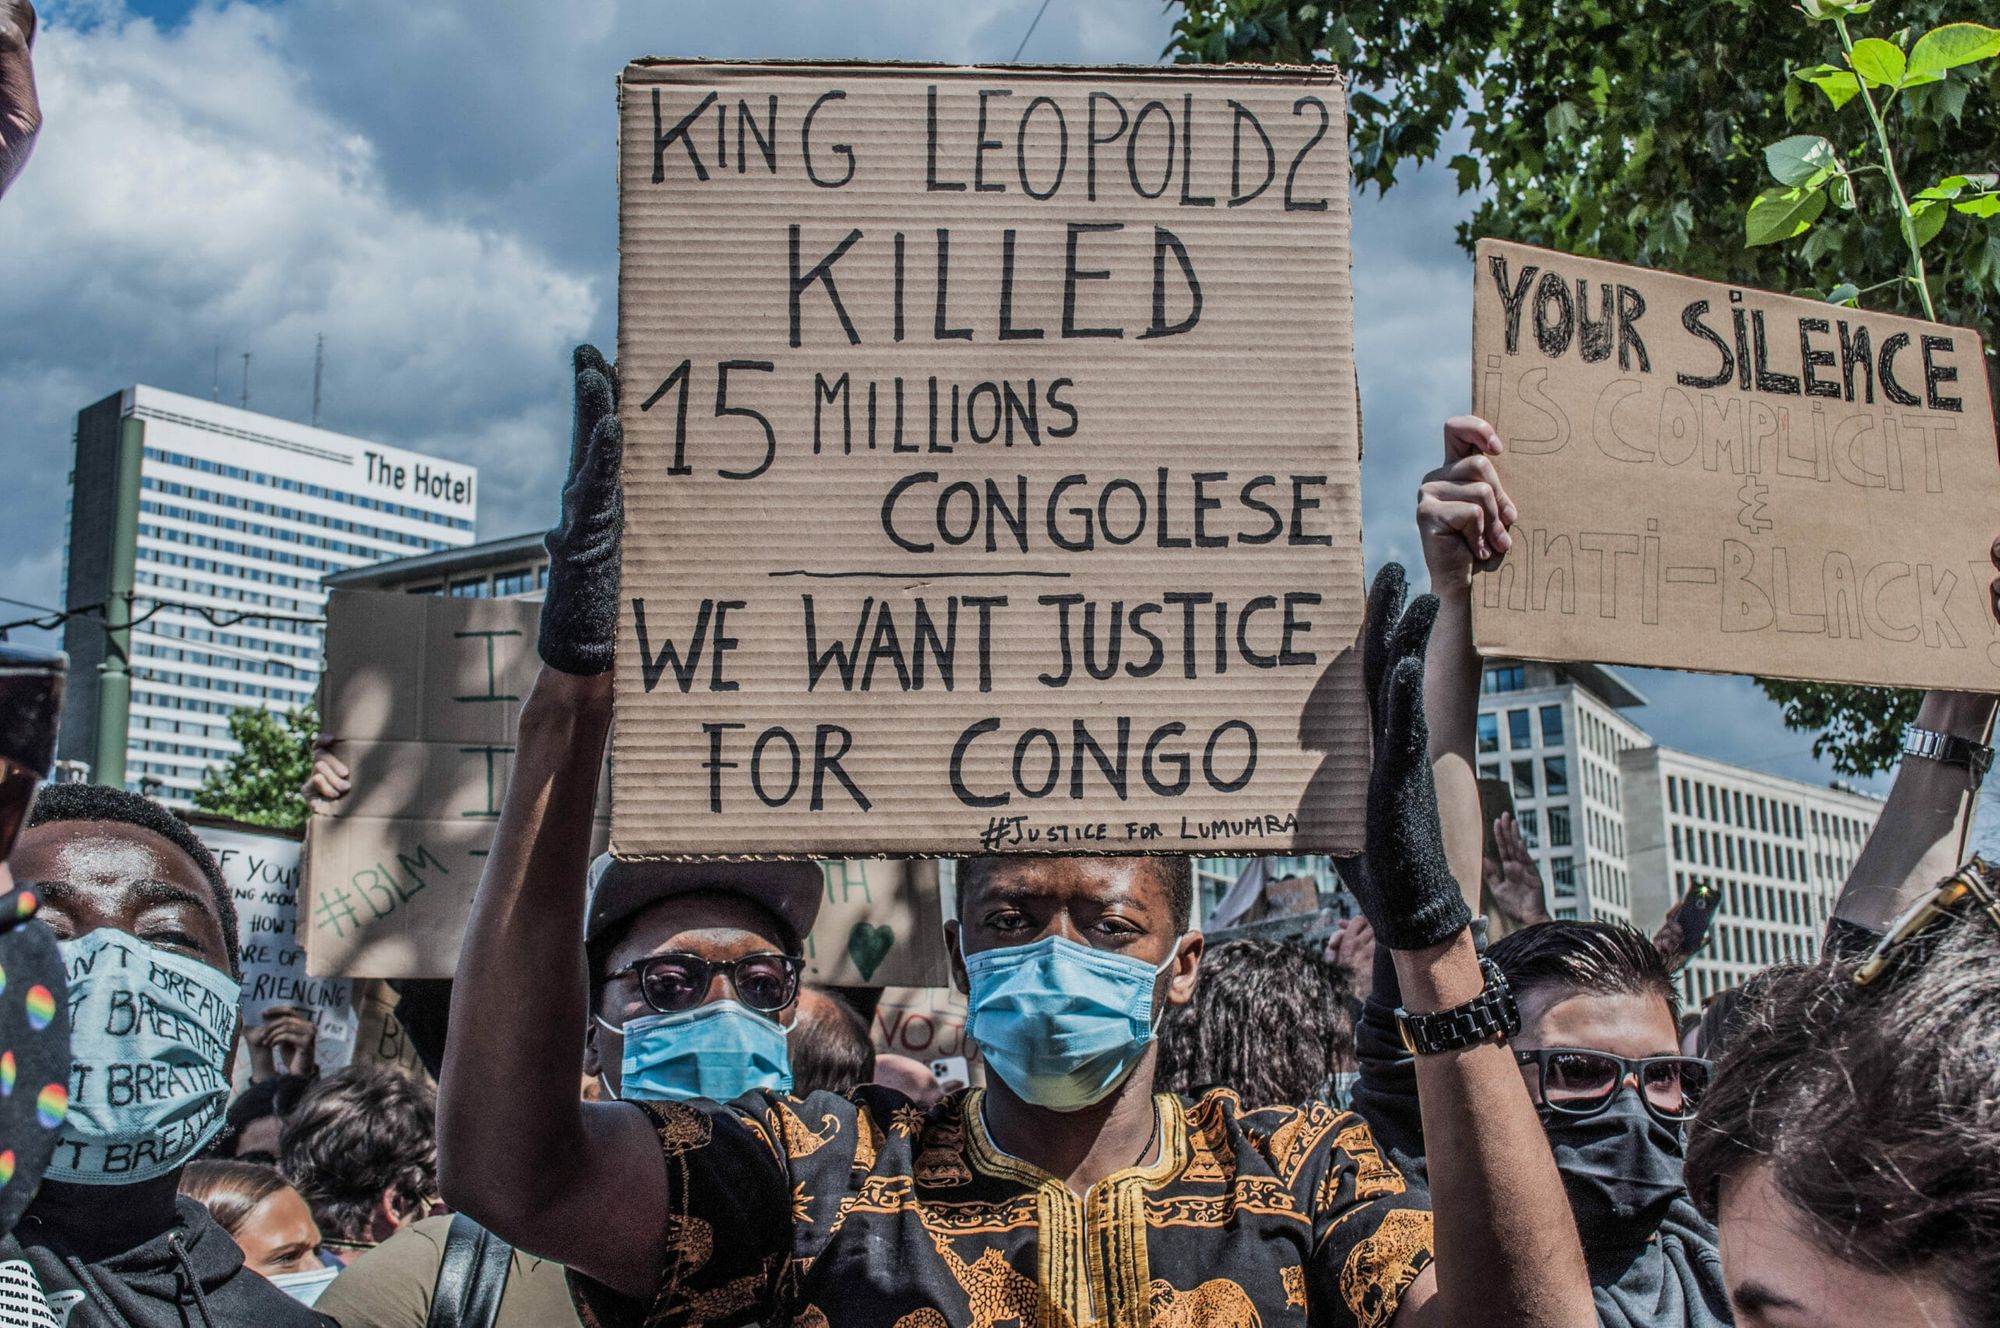 King Leopold killed 15 Millions of Congolese. We want justice for Congo.